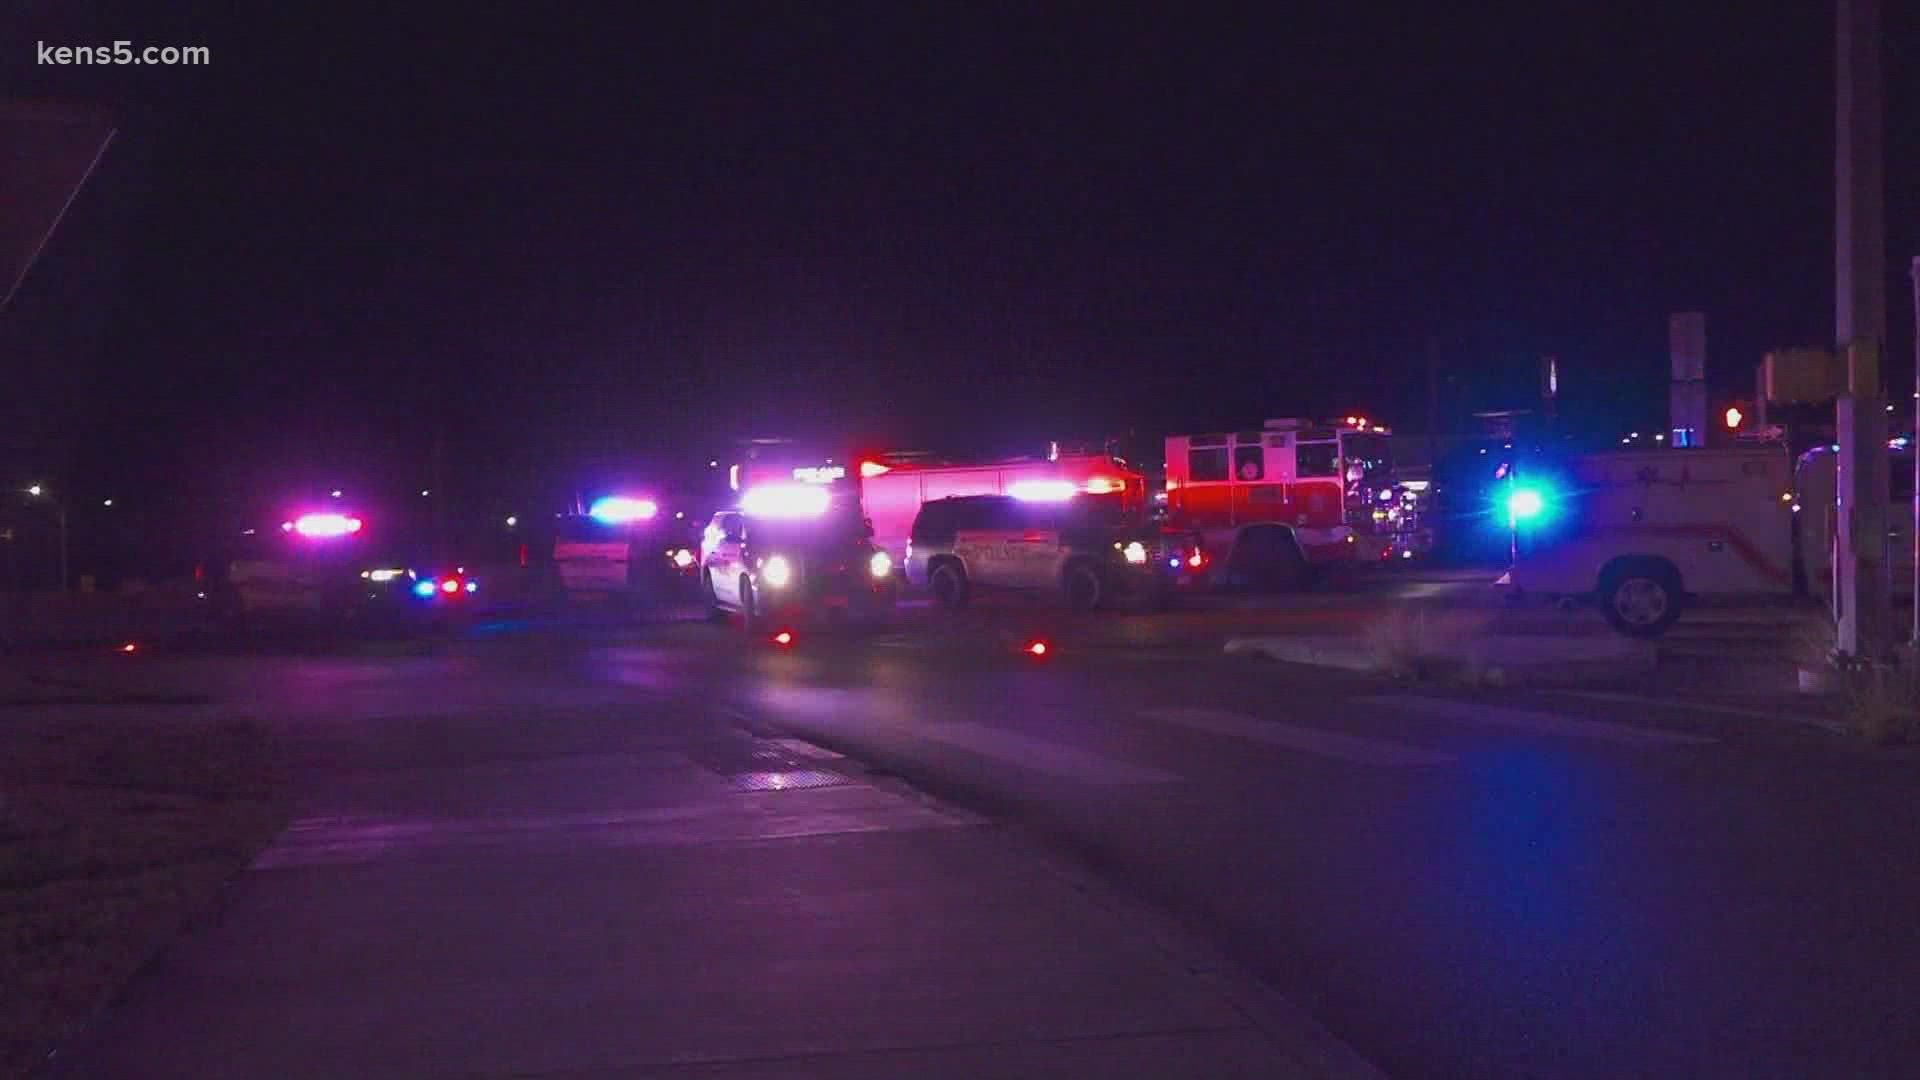 The sergeant on the scene told KENS 5 the officer had the right away when he was hit at the intersection of West Military Drive and the access road to Highway 151.